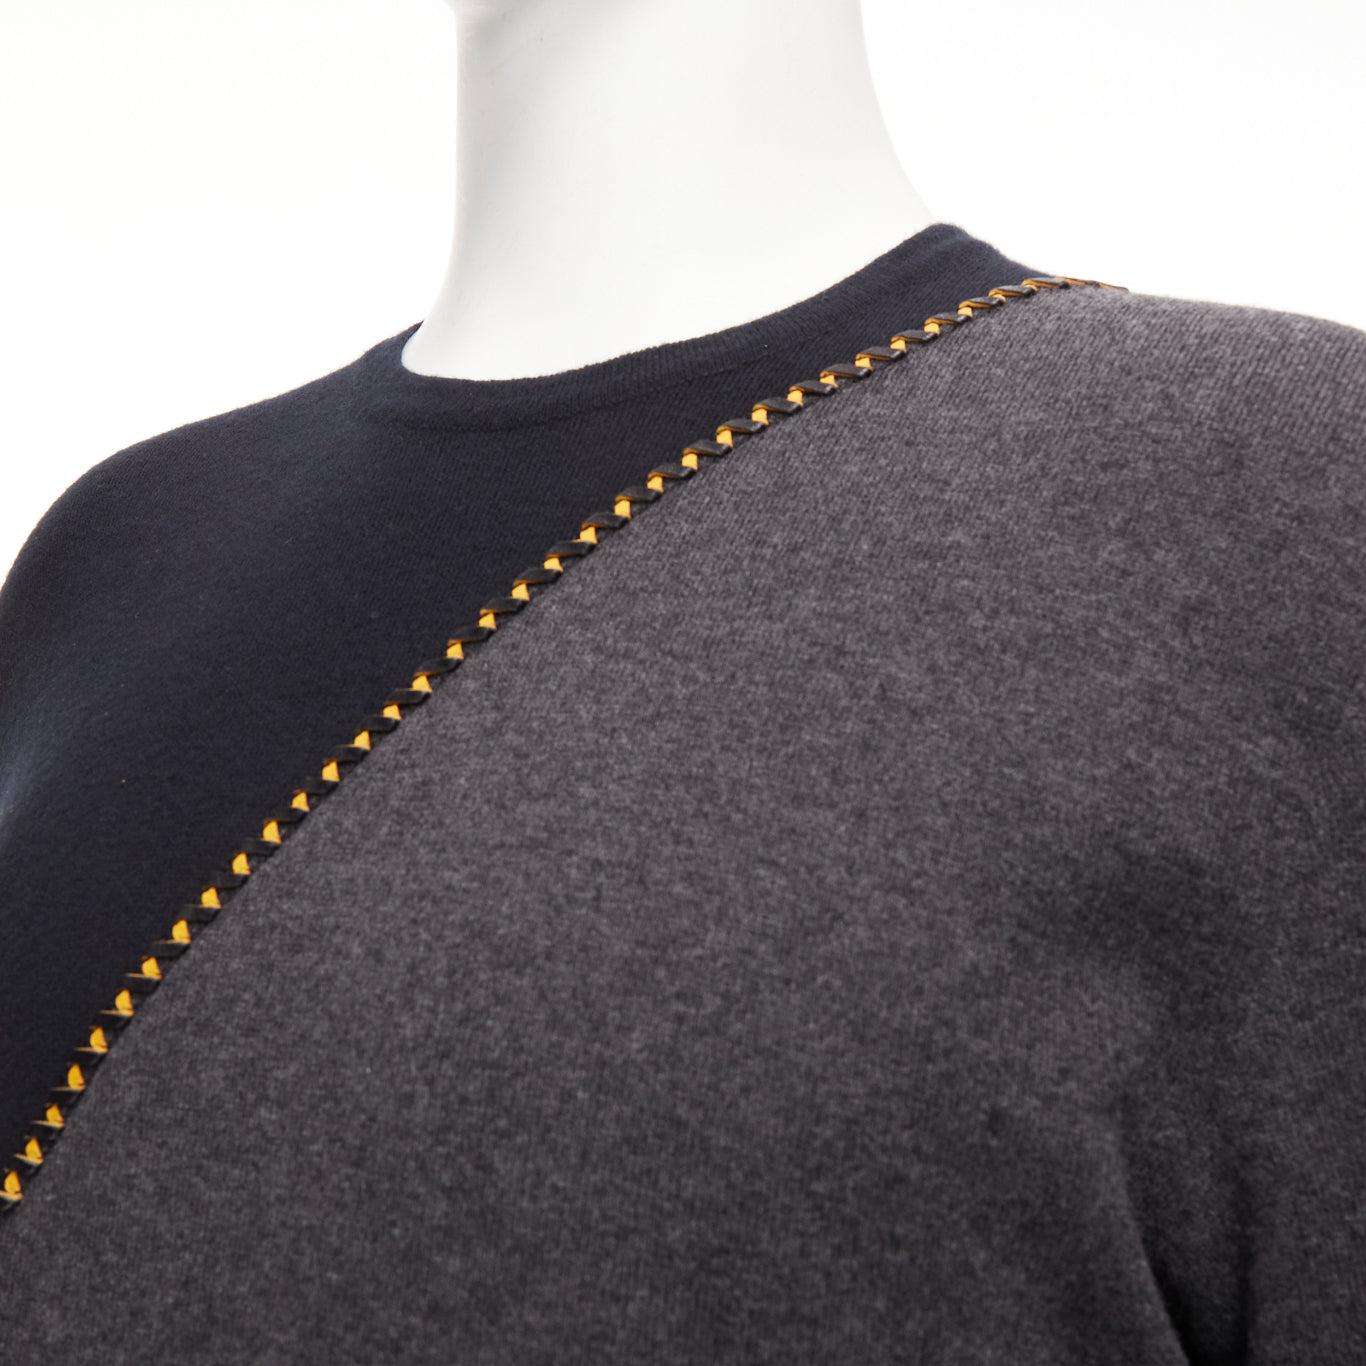 BERLUTI grey black yellow lambskin leather stitch wool cashmere split sweater M
Reference: JSLE/A00122
Brand: Berluti
Material: Wool, Cashmere, Leather
Color: Grey, Yellow
Pattern: Solid
Closure: Pullover
Made in: Italy

CONDITION:
Condition: